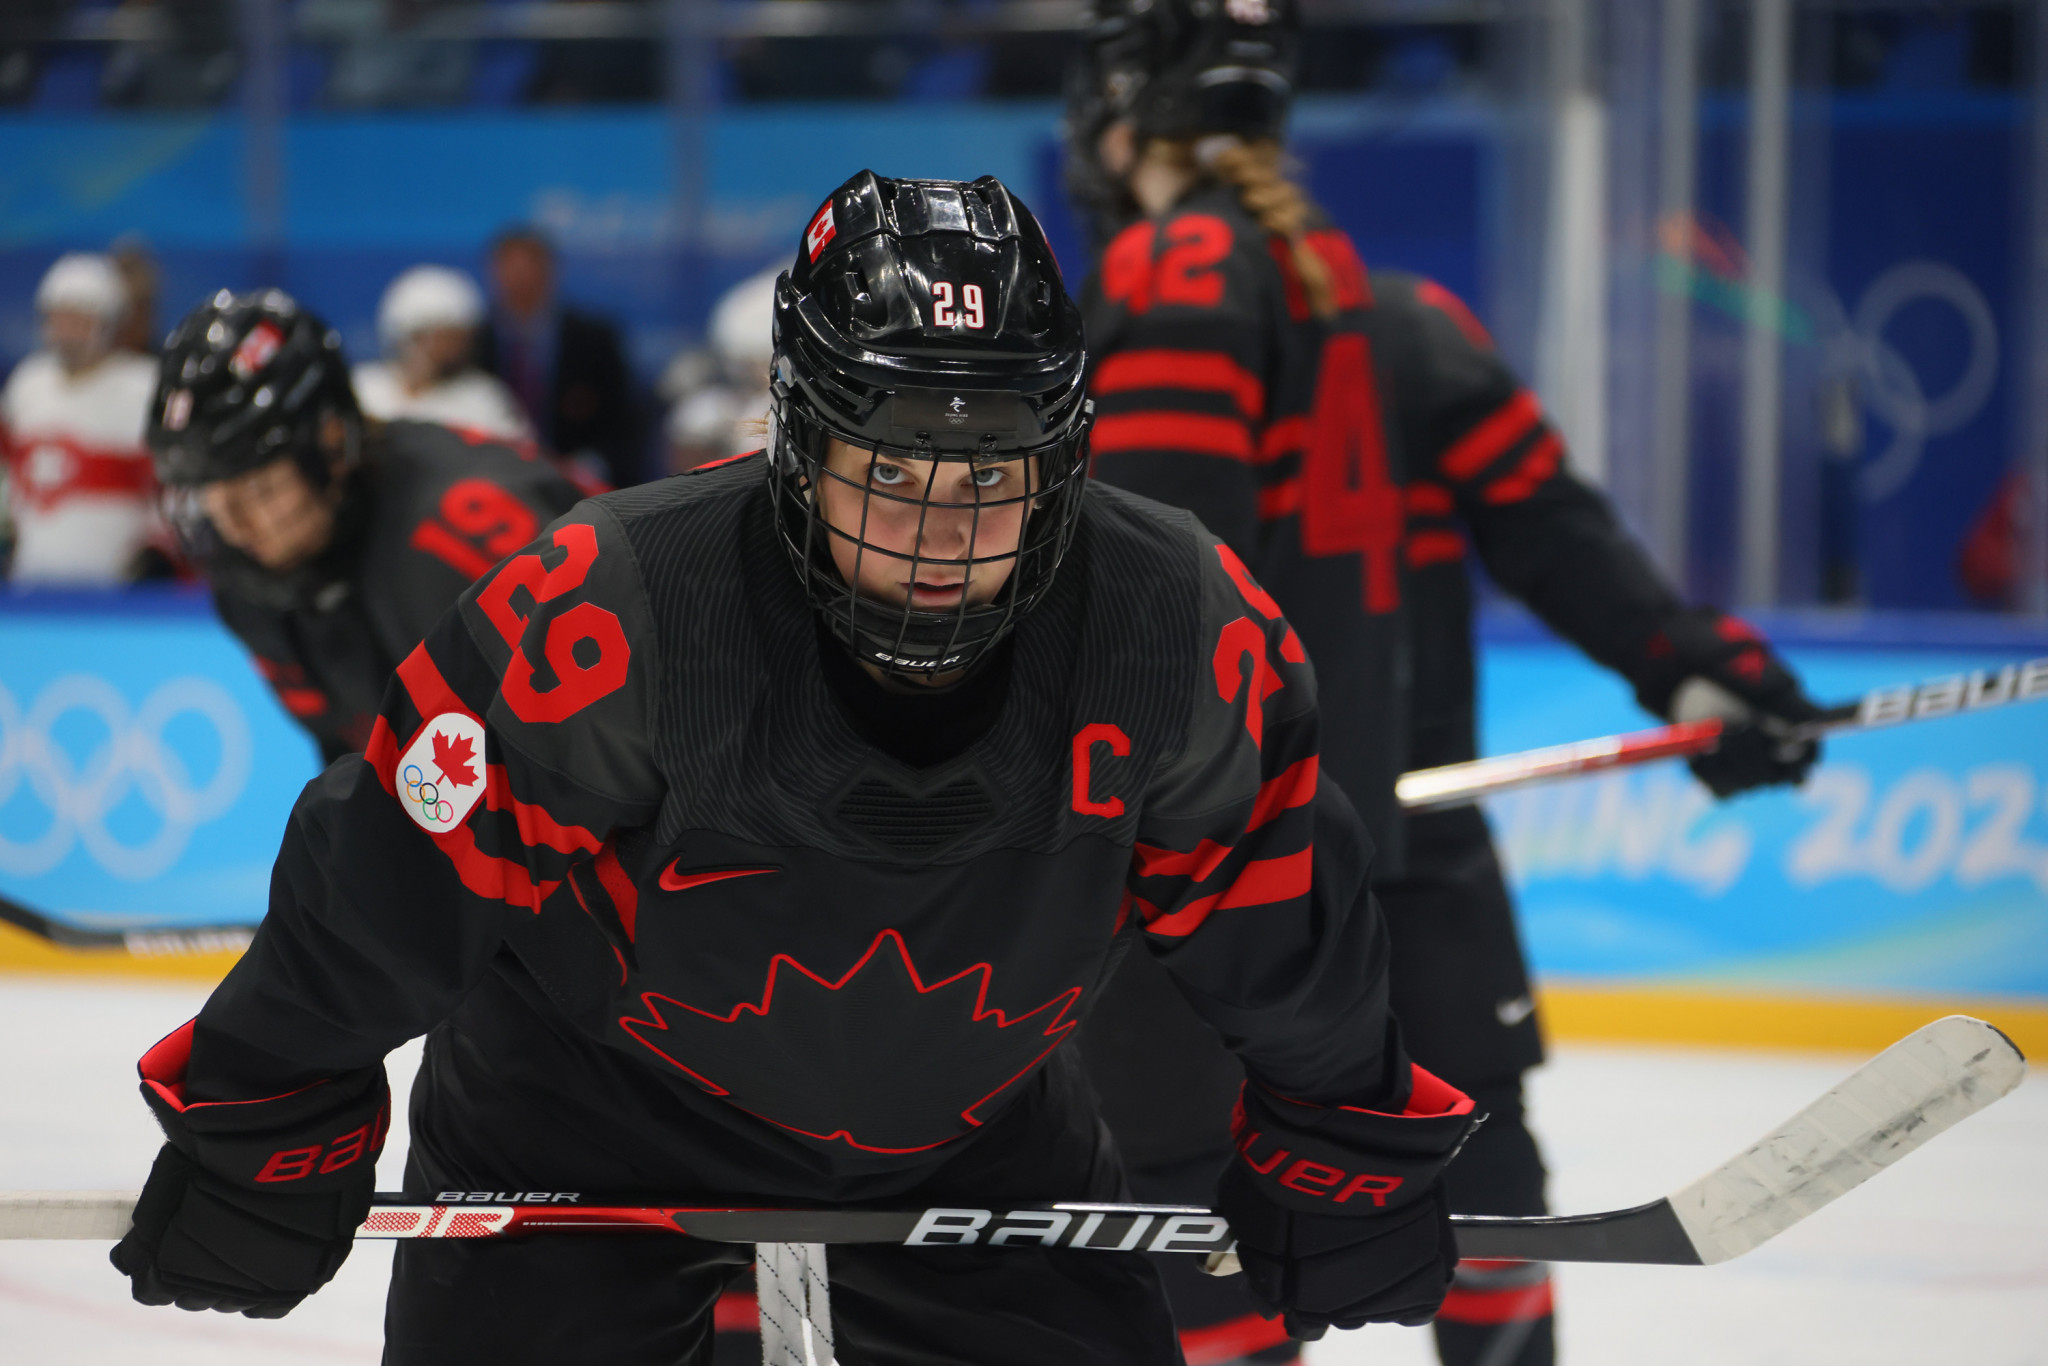 Canada thumped Switzerland in the women's ice hockey opener ©Getty Images